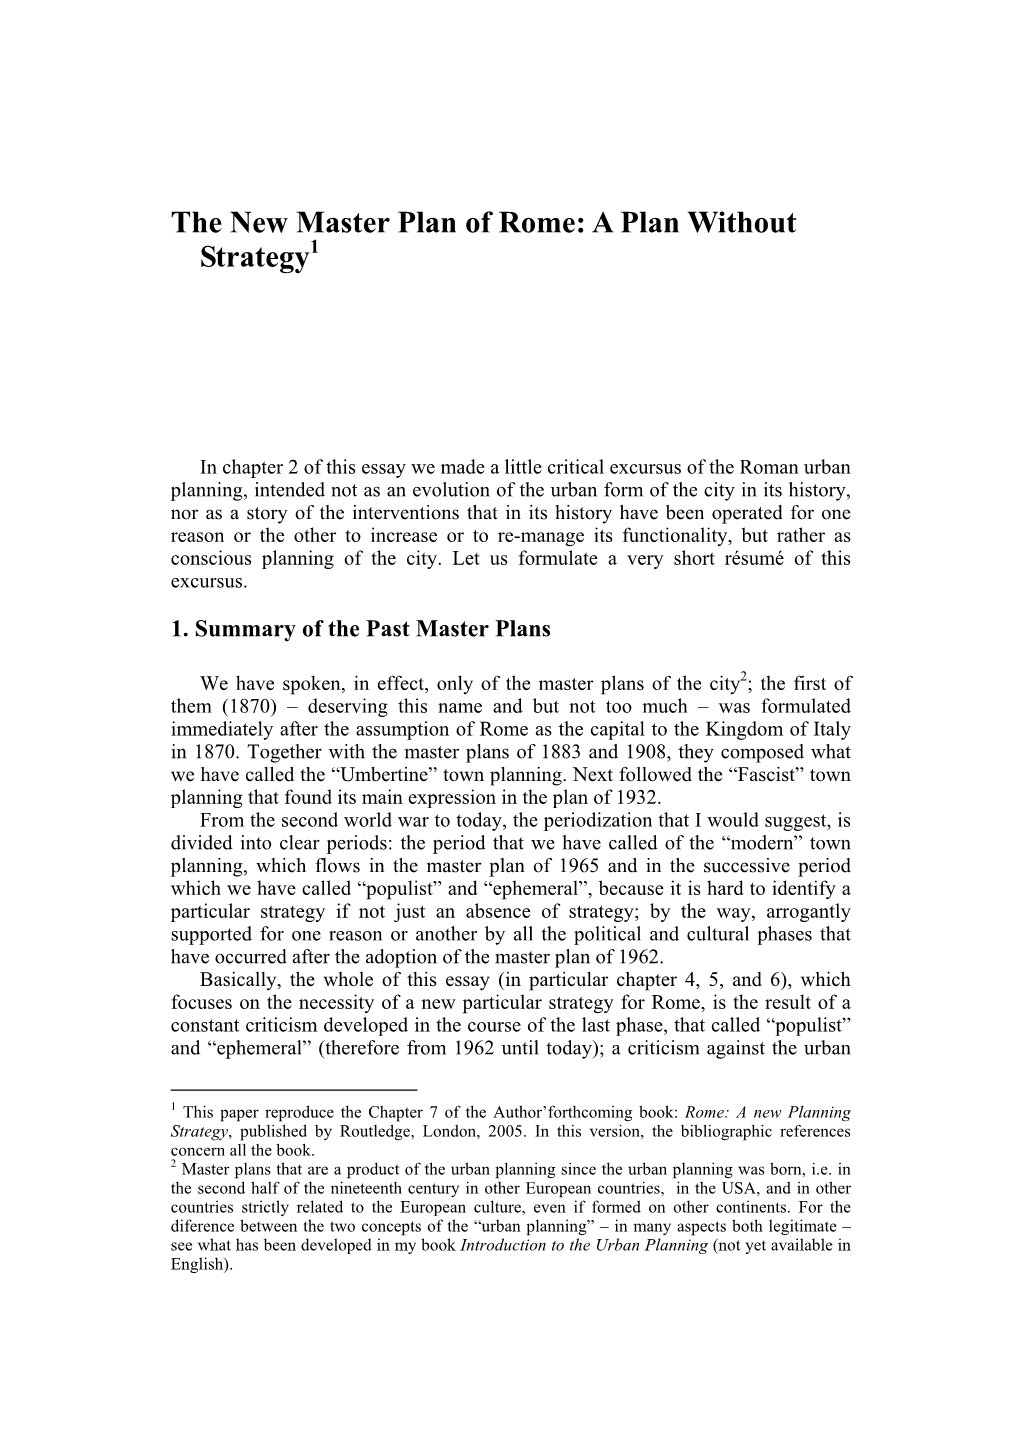 The New Master Plan of Rome: a Plan Without Strategy1